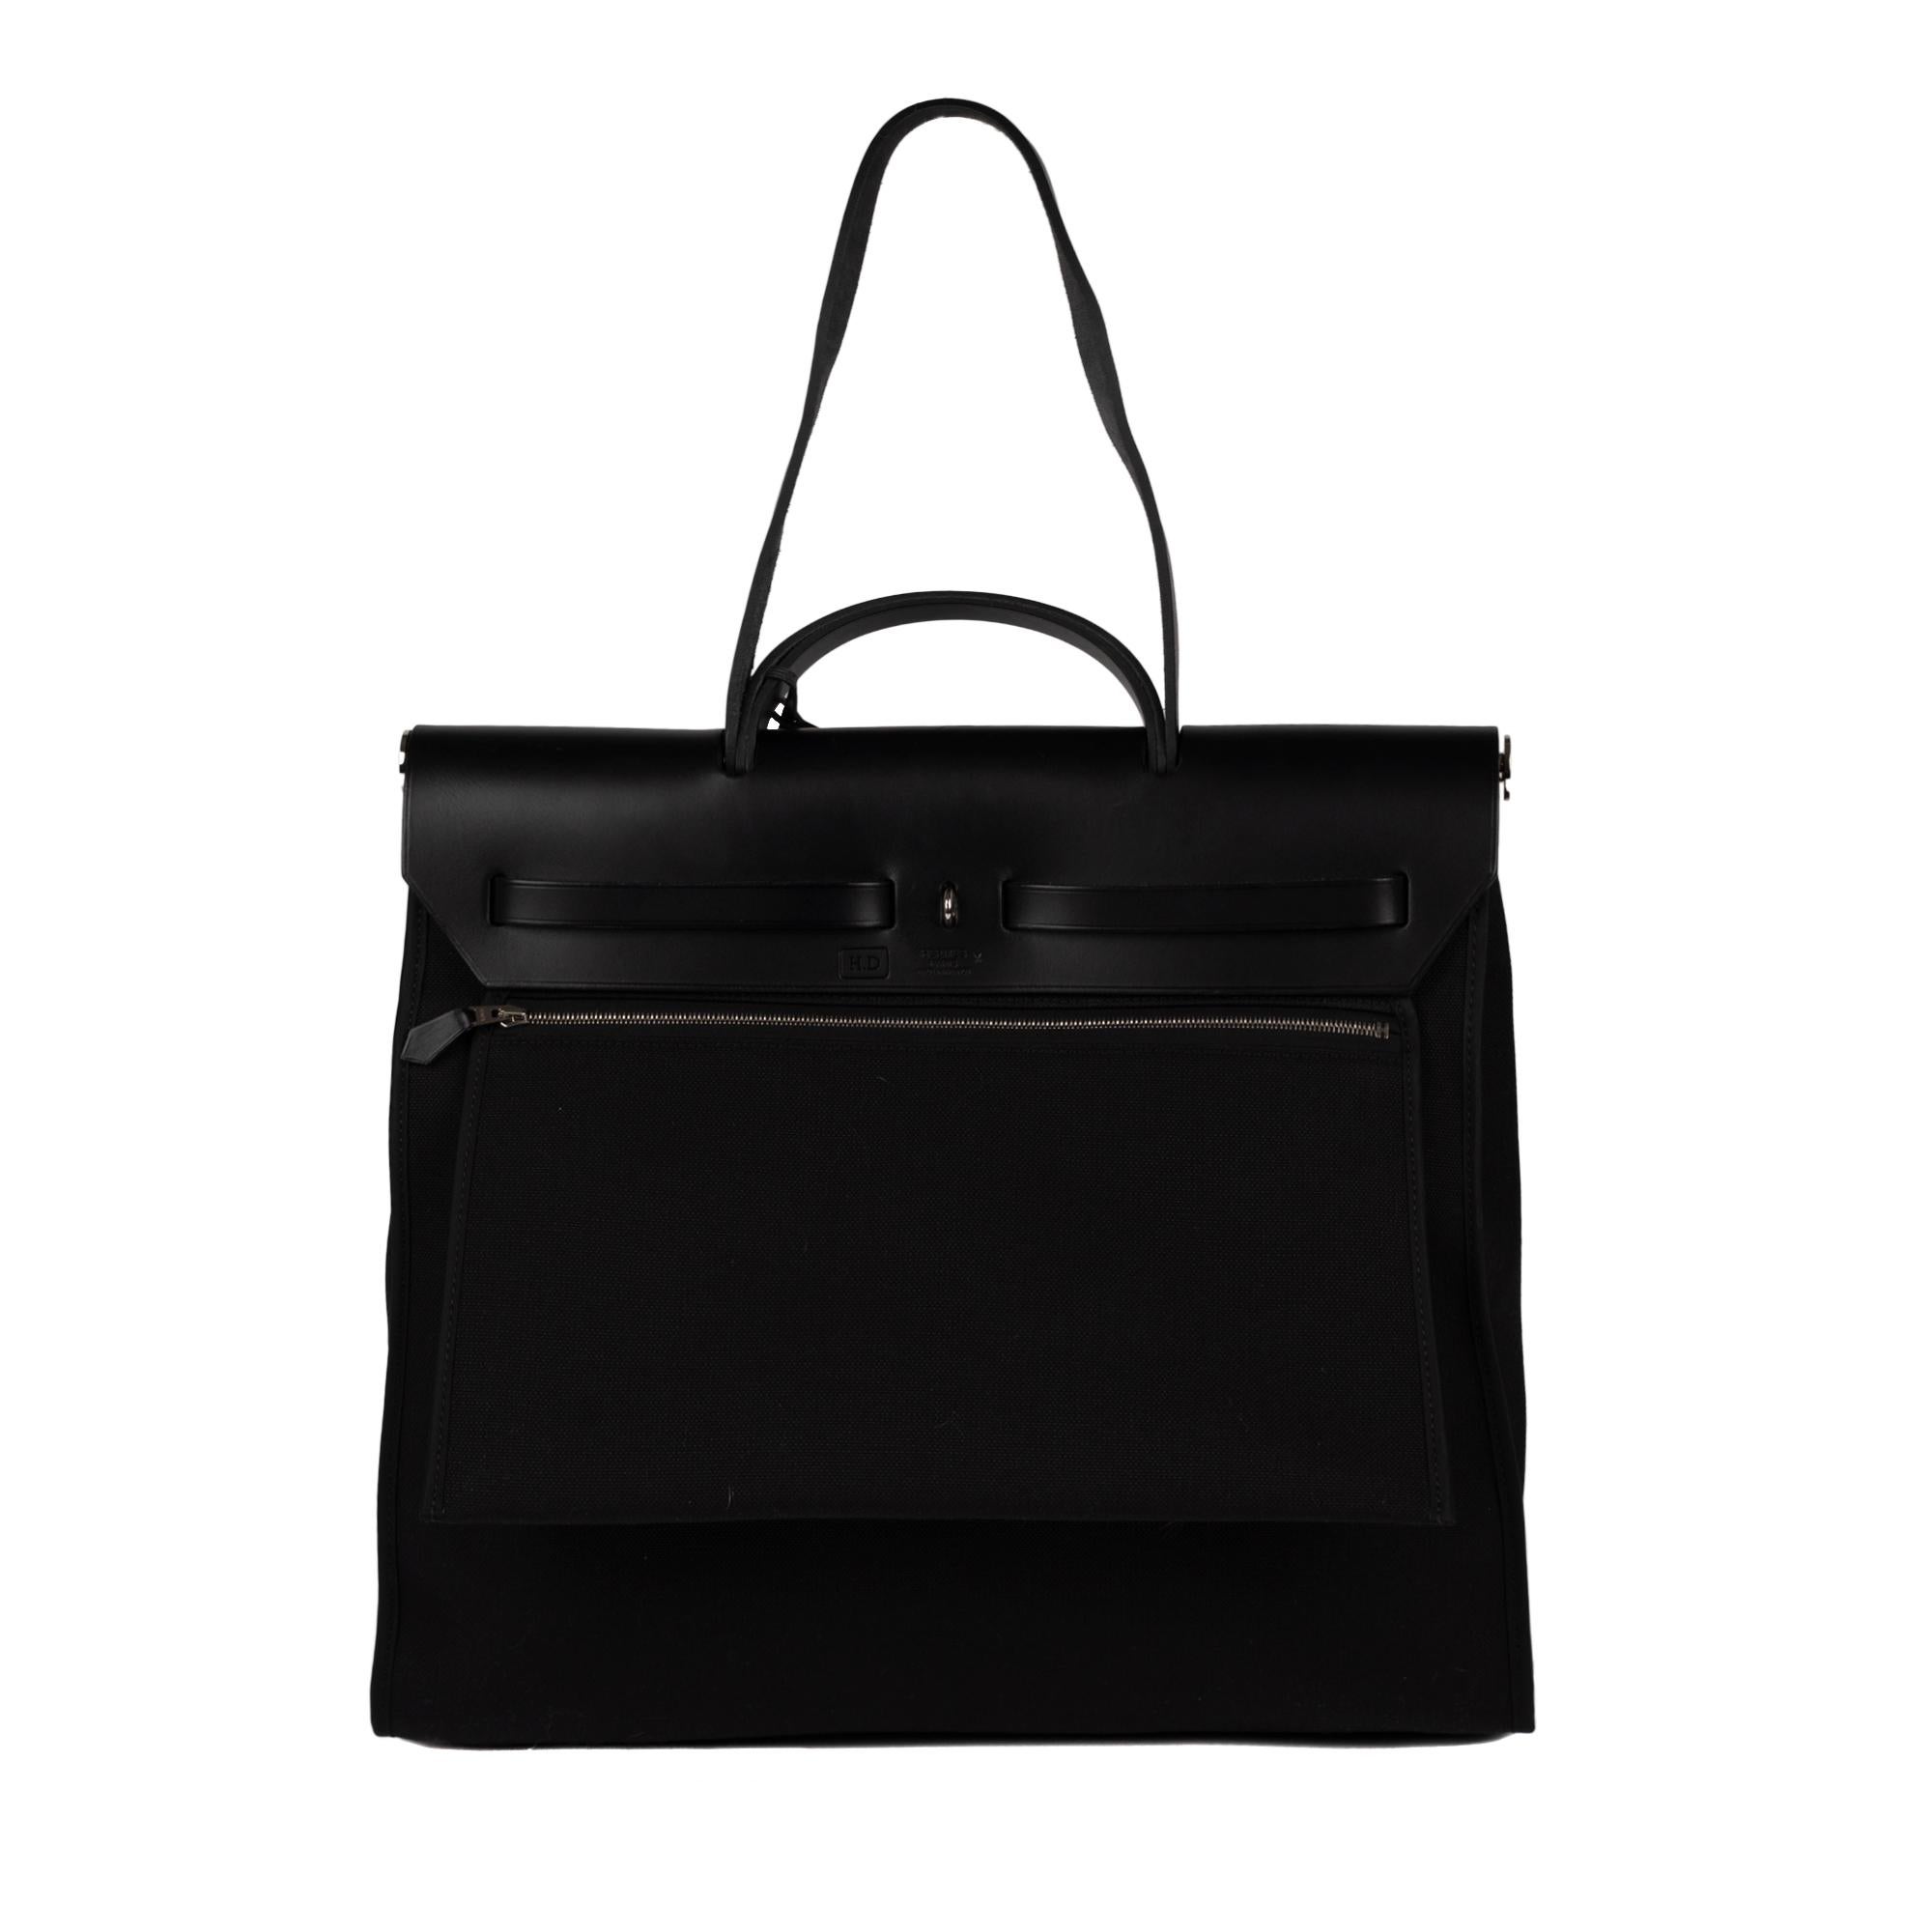 Hermès Herbag bag - black canvas and leather, palladium-plated metal trim, simple black leather handle, double black leather handle for hand or shoulder support.

One closure per flap.
Interior in black canvas.
Sold with zipper, bell, lock, keys and